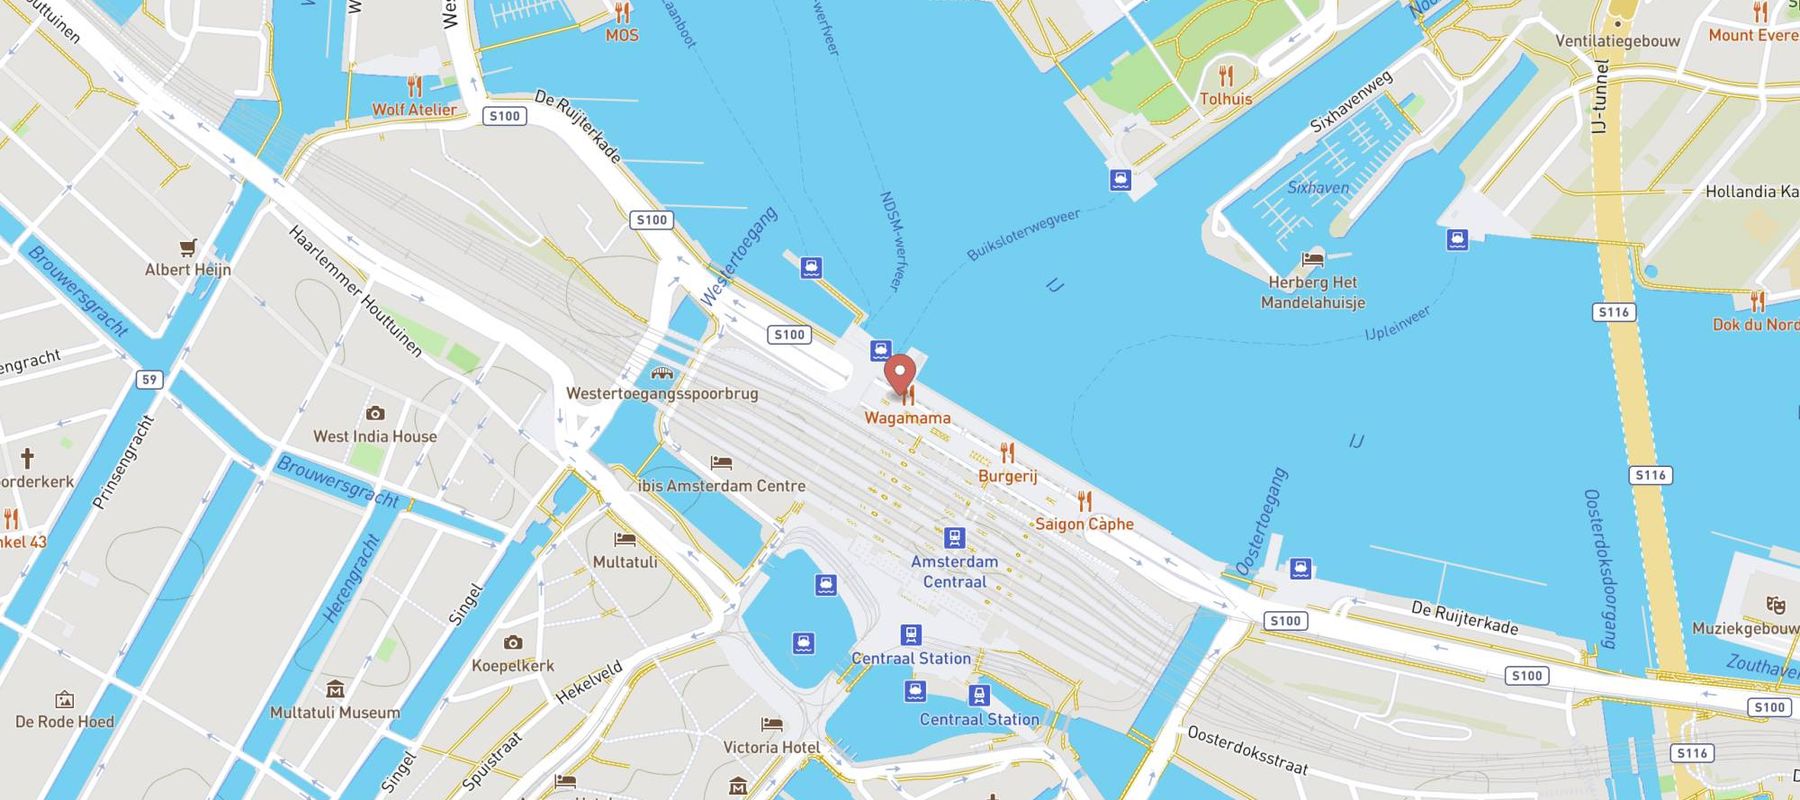 wagamama Amsterdam Centraal Station map